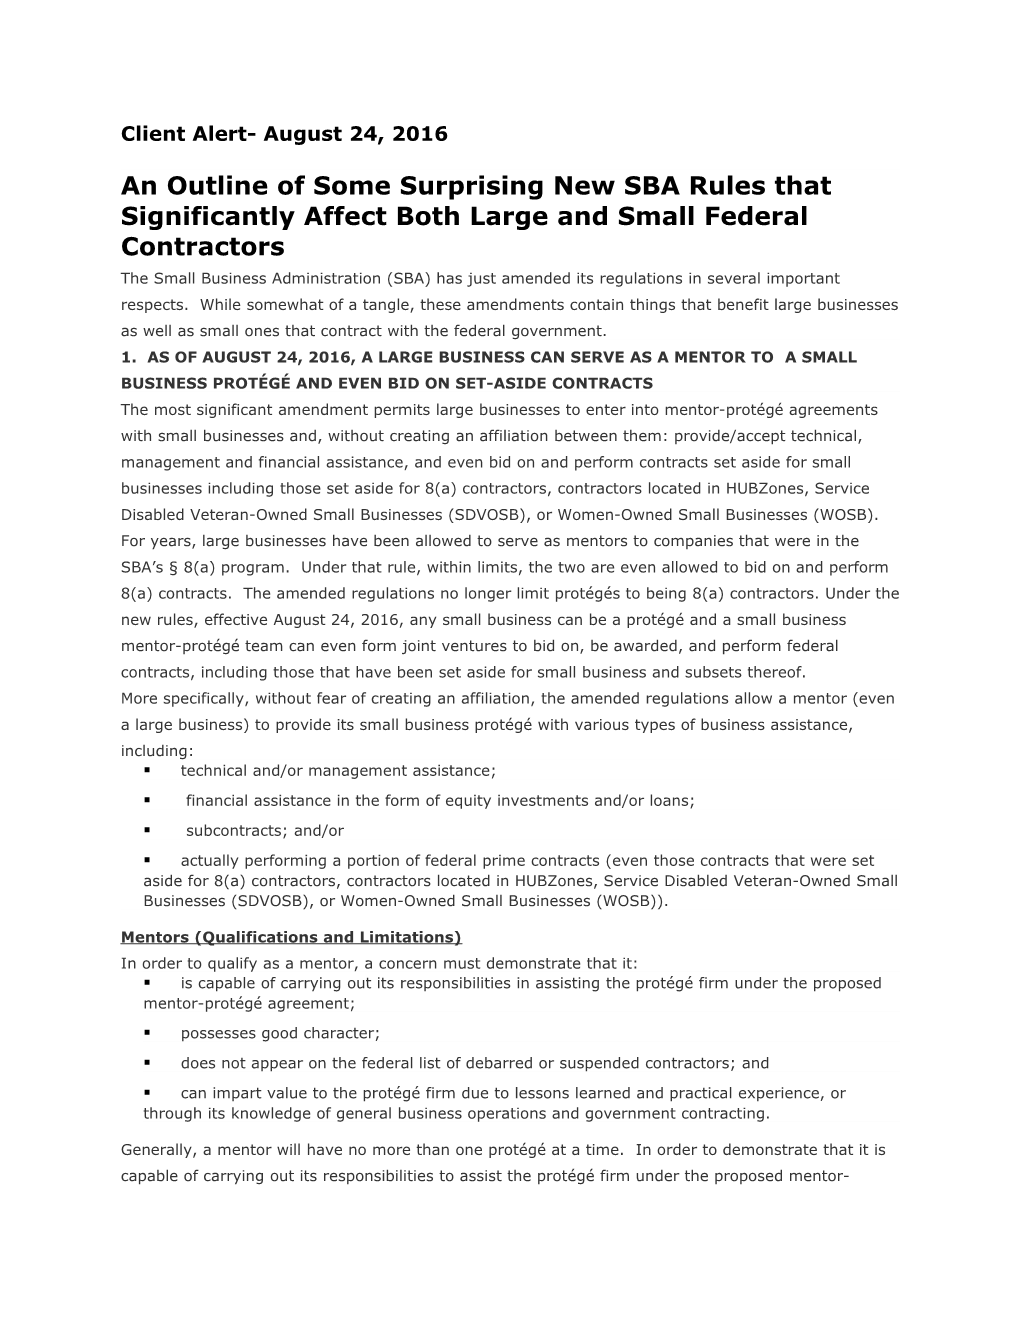 An Outline of Some Surprising New SBA Rules That Significantly Affect Both Large and Small